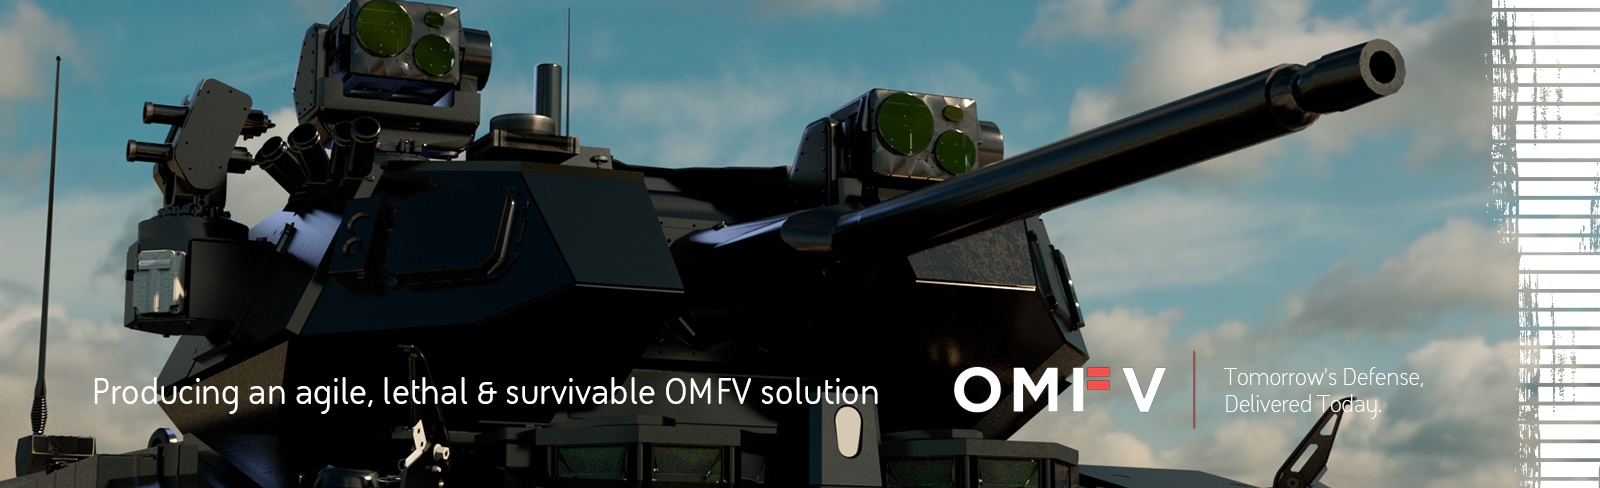 Producing a lethal, mobile, survivable OMFV solution